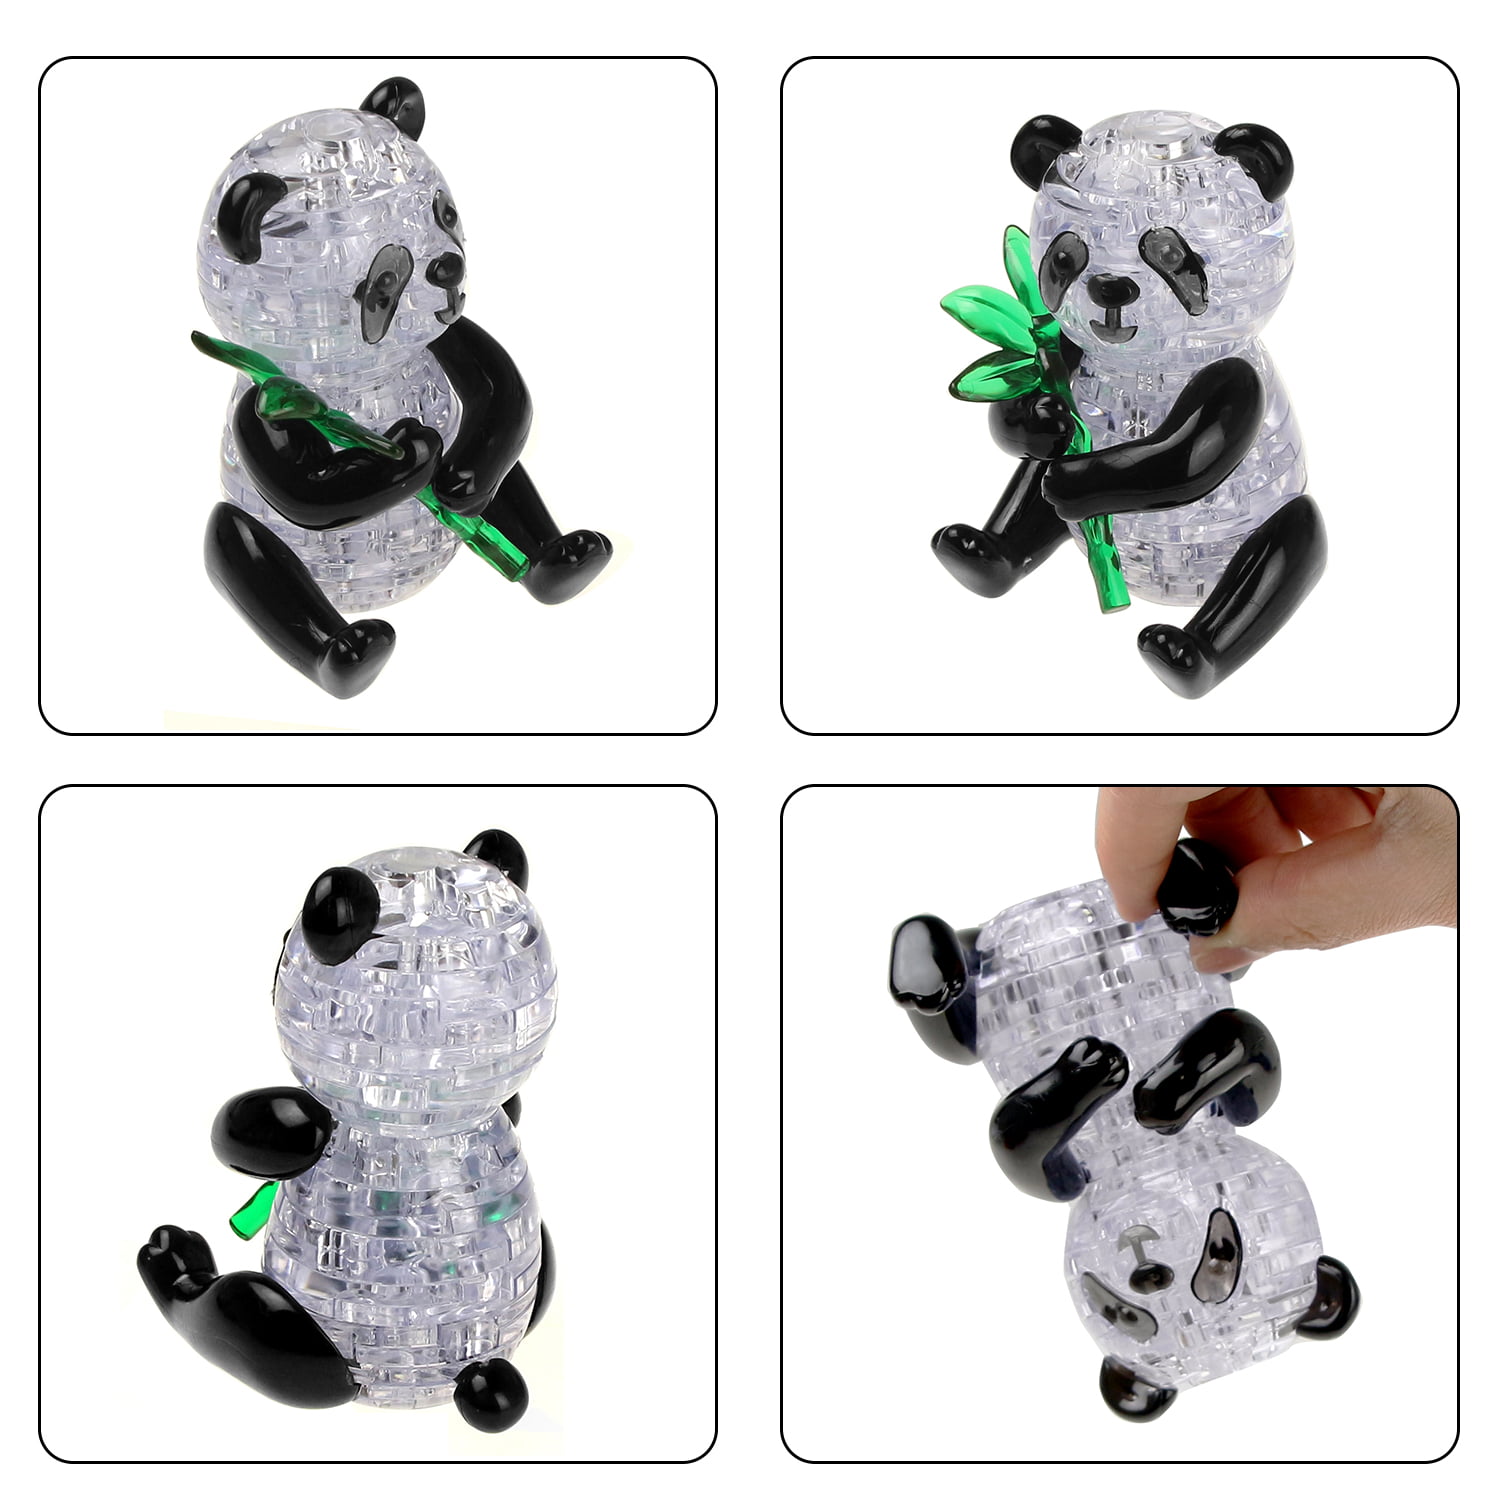  KouRy 3D Crystal Puzzle, Panda Model Gadget Blocks Building Toy  Ideal Gift : Toys & Games